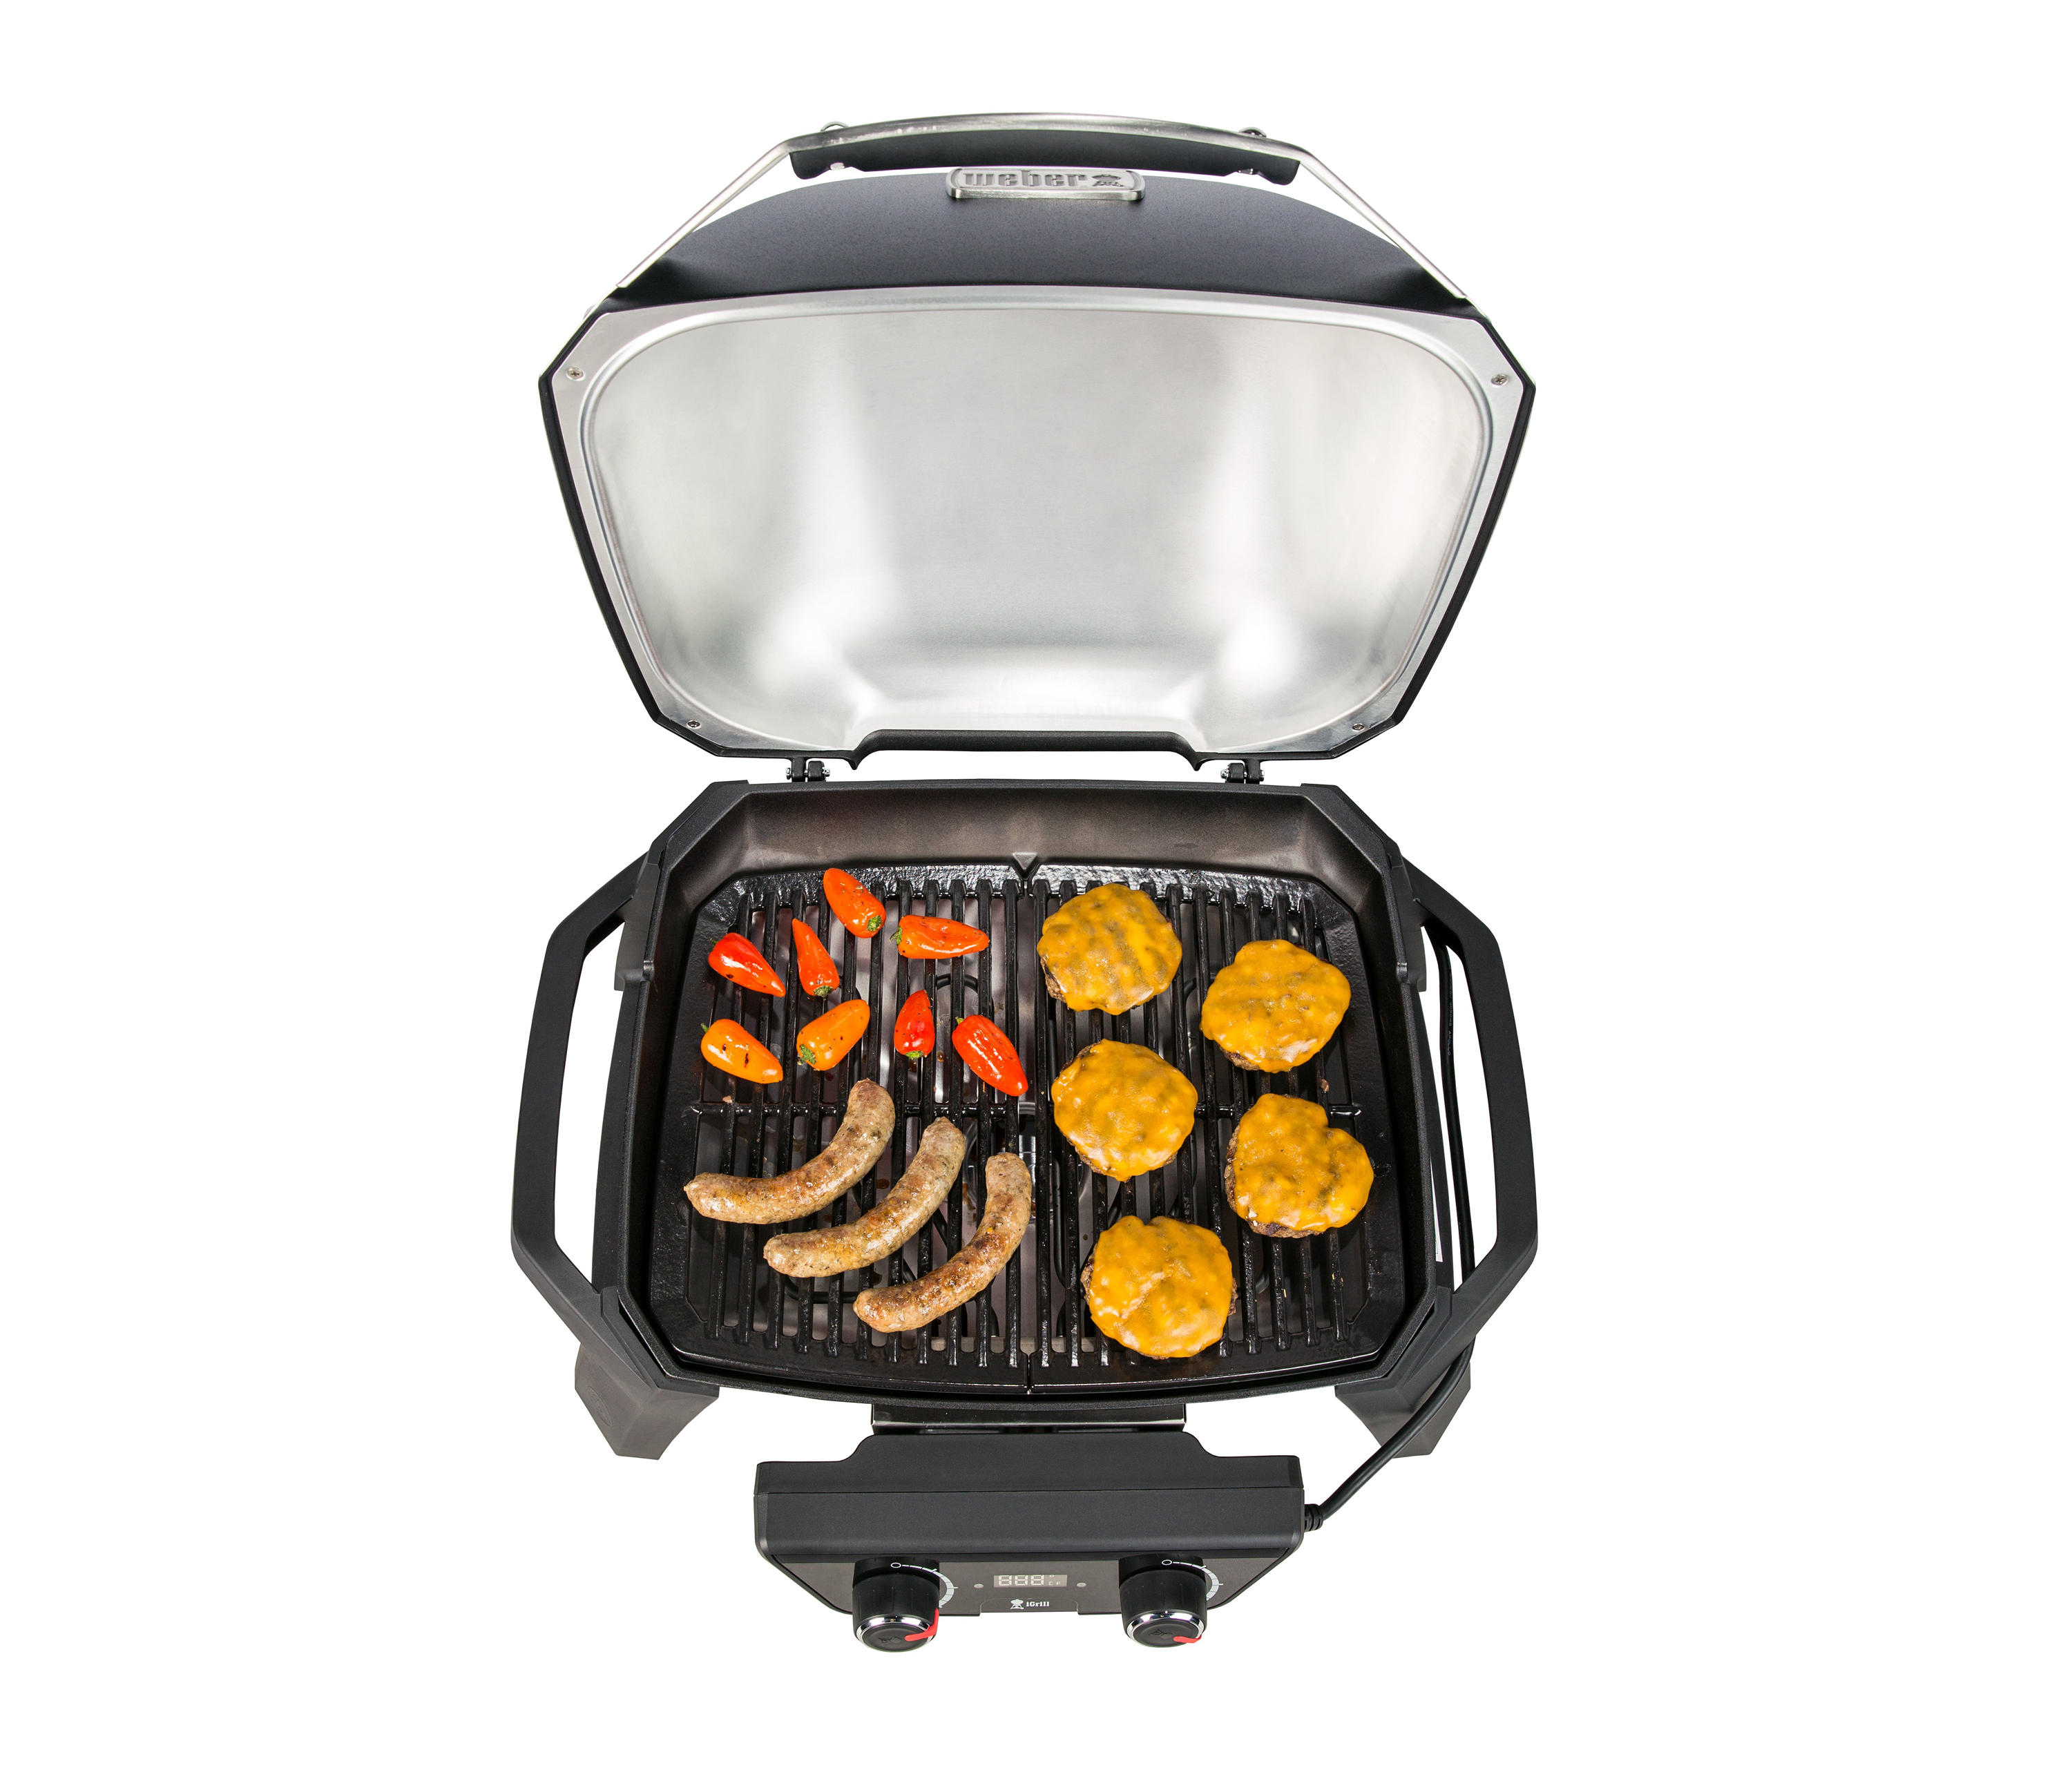 PULSE 2000 - Barbecues Weber | Architonic